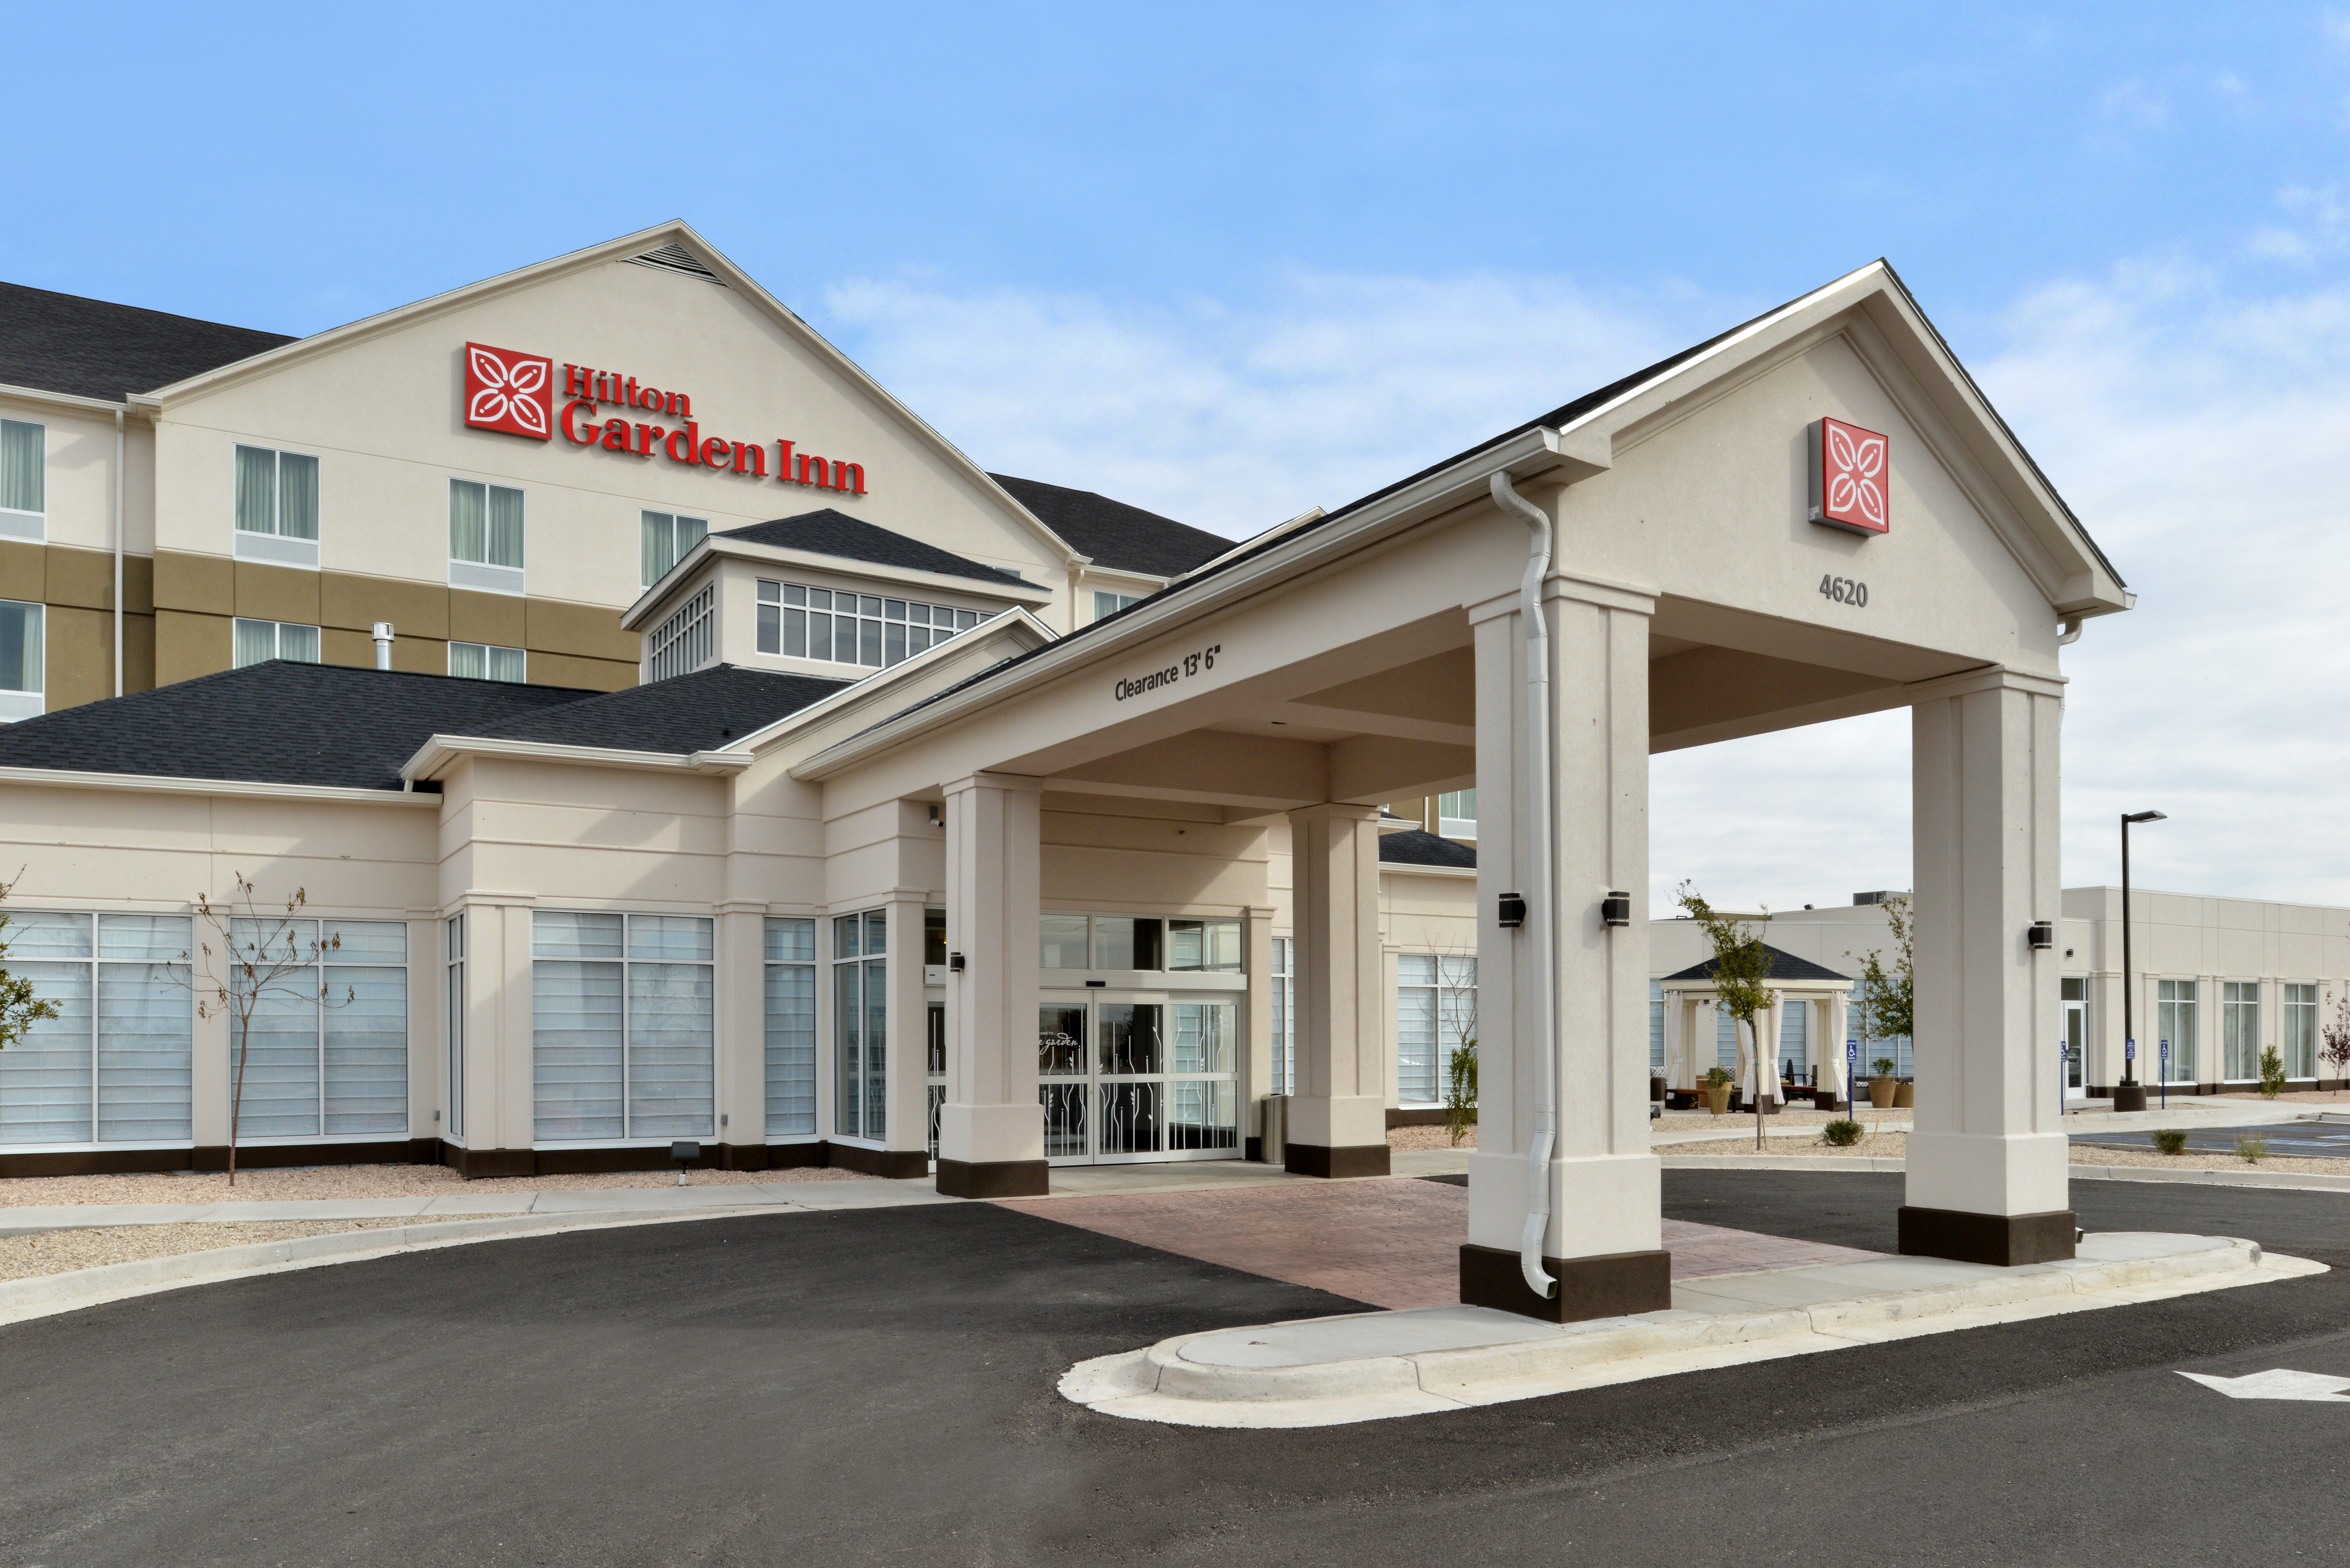 Daytime View of Hotel Exterior, Signage, Landscaping, Circle Driveway, and Parking Lot